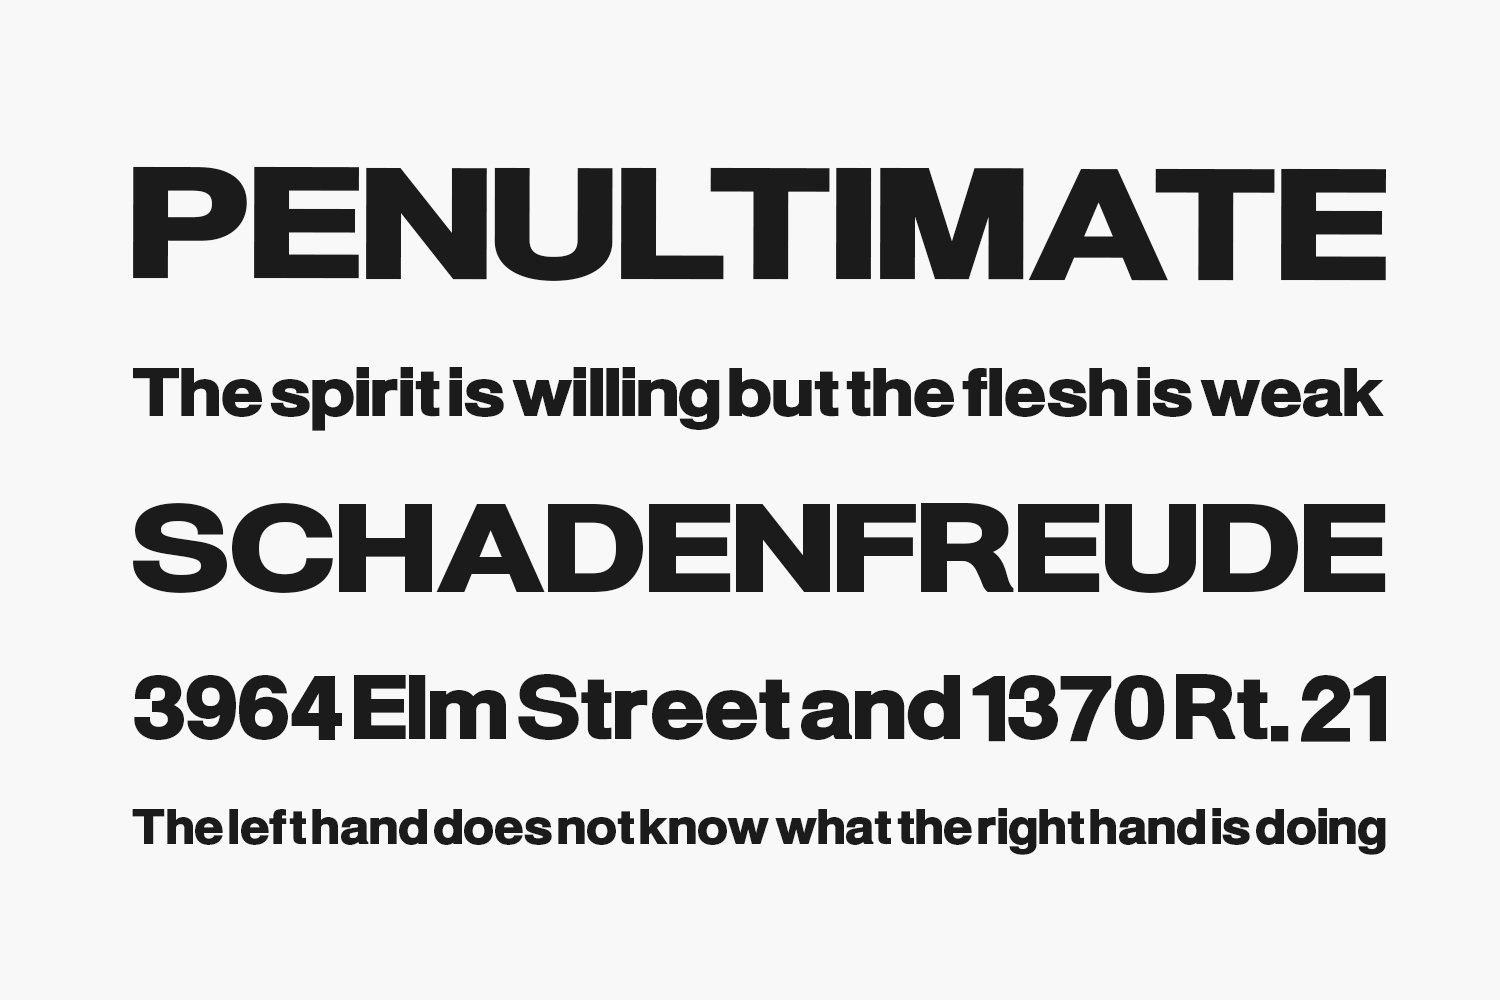 helvetica neue bold free font download